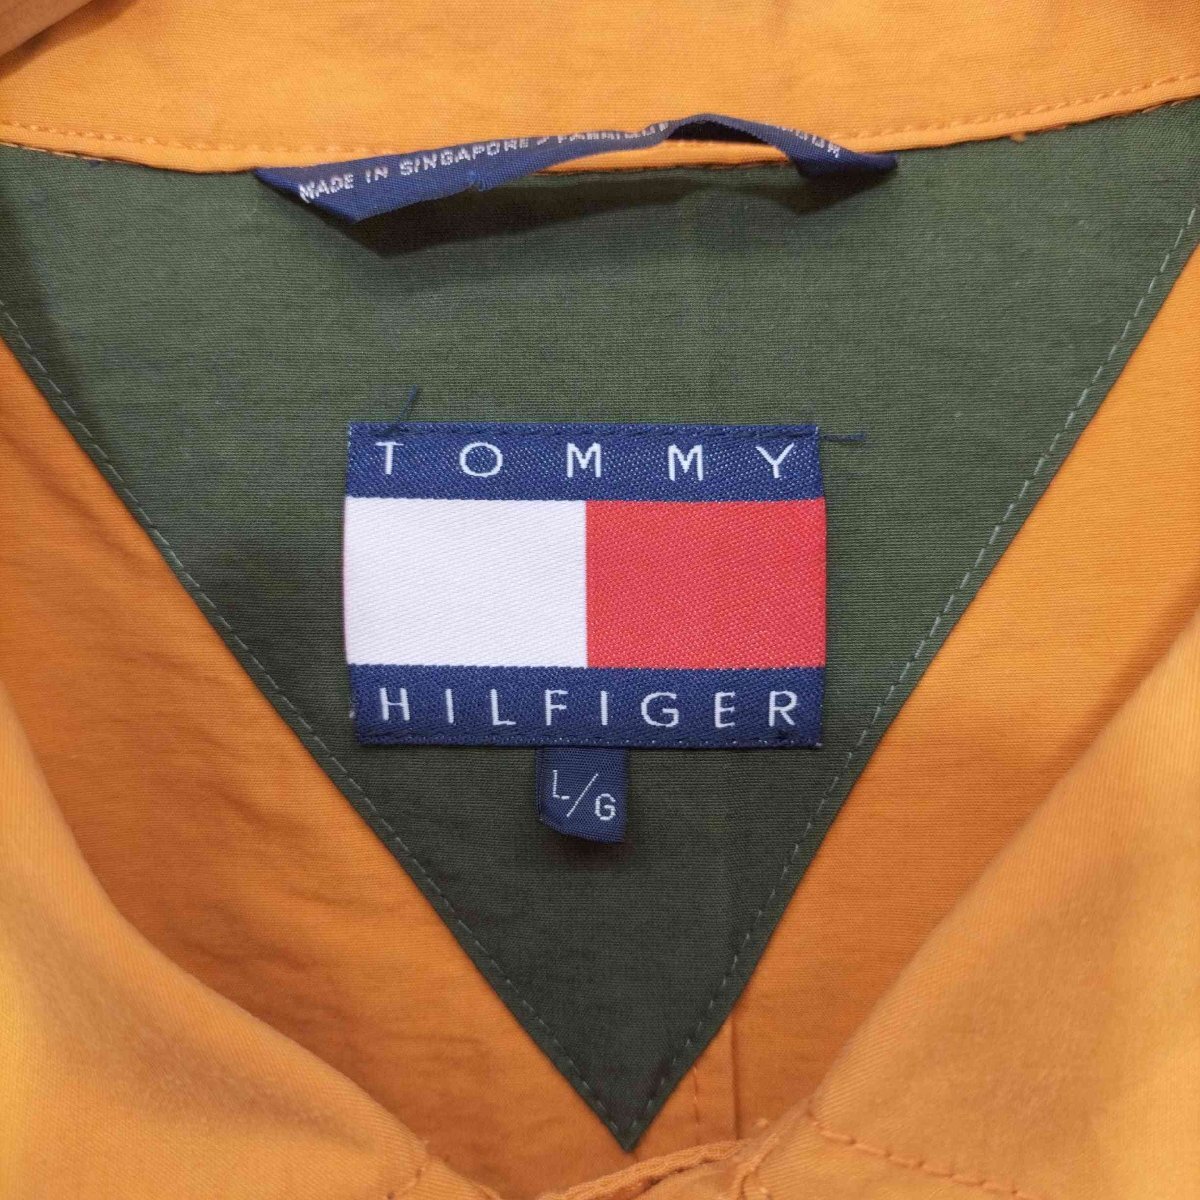 TOMMY HILFIGER(トミーヒルフィガー) 90S MADE IN SINGAPORE コットンナ 中古 古着 0804_画像6